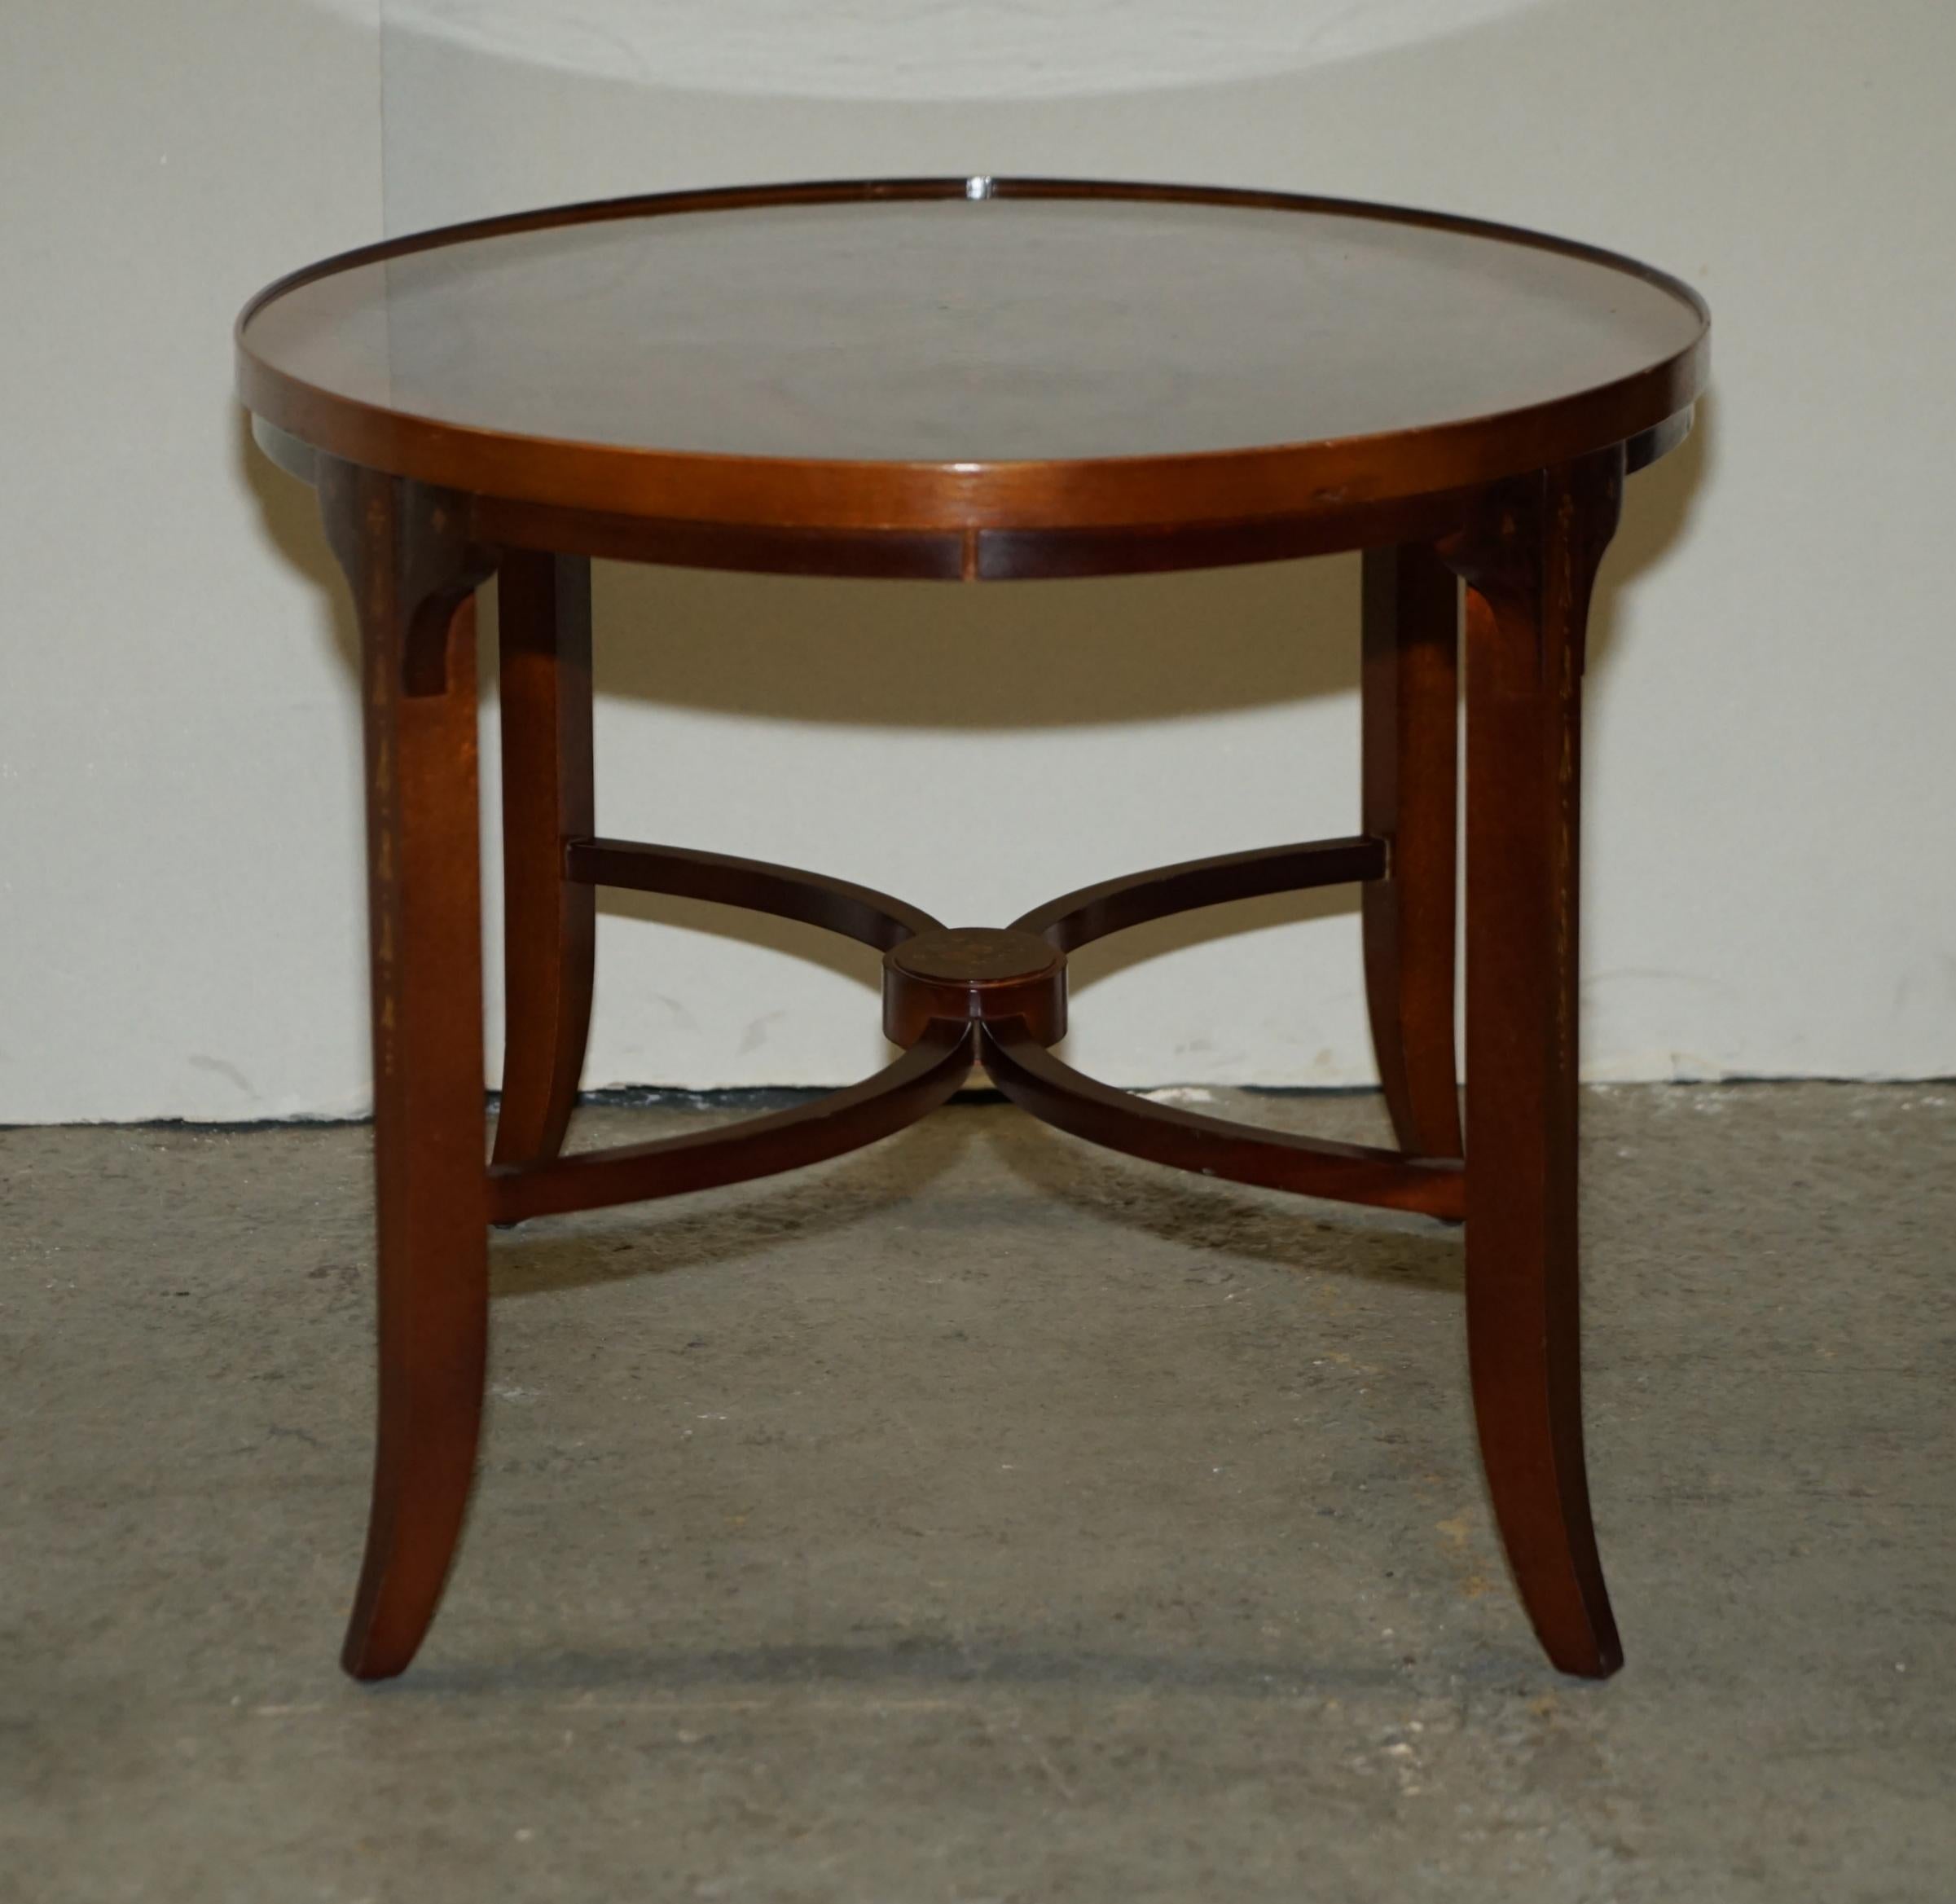 Stunning Oval Hardwood Coffee Table With Splayed Legs Decorative Floral Detail 7